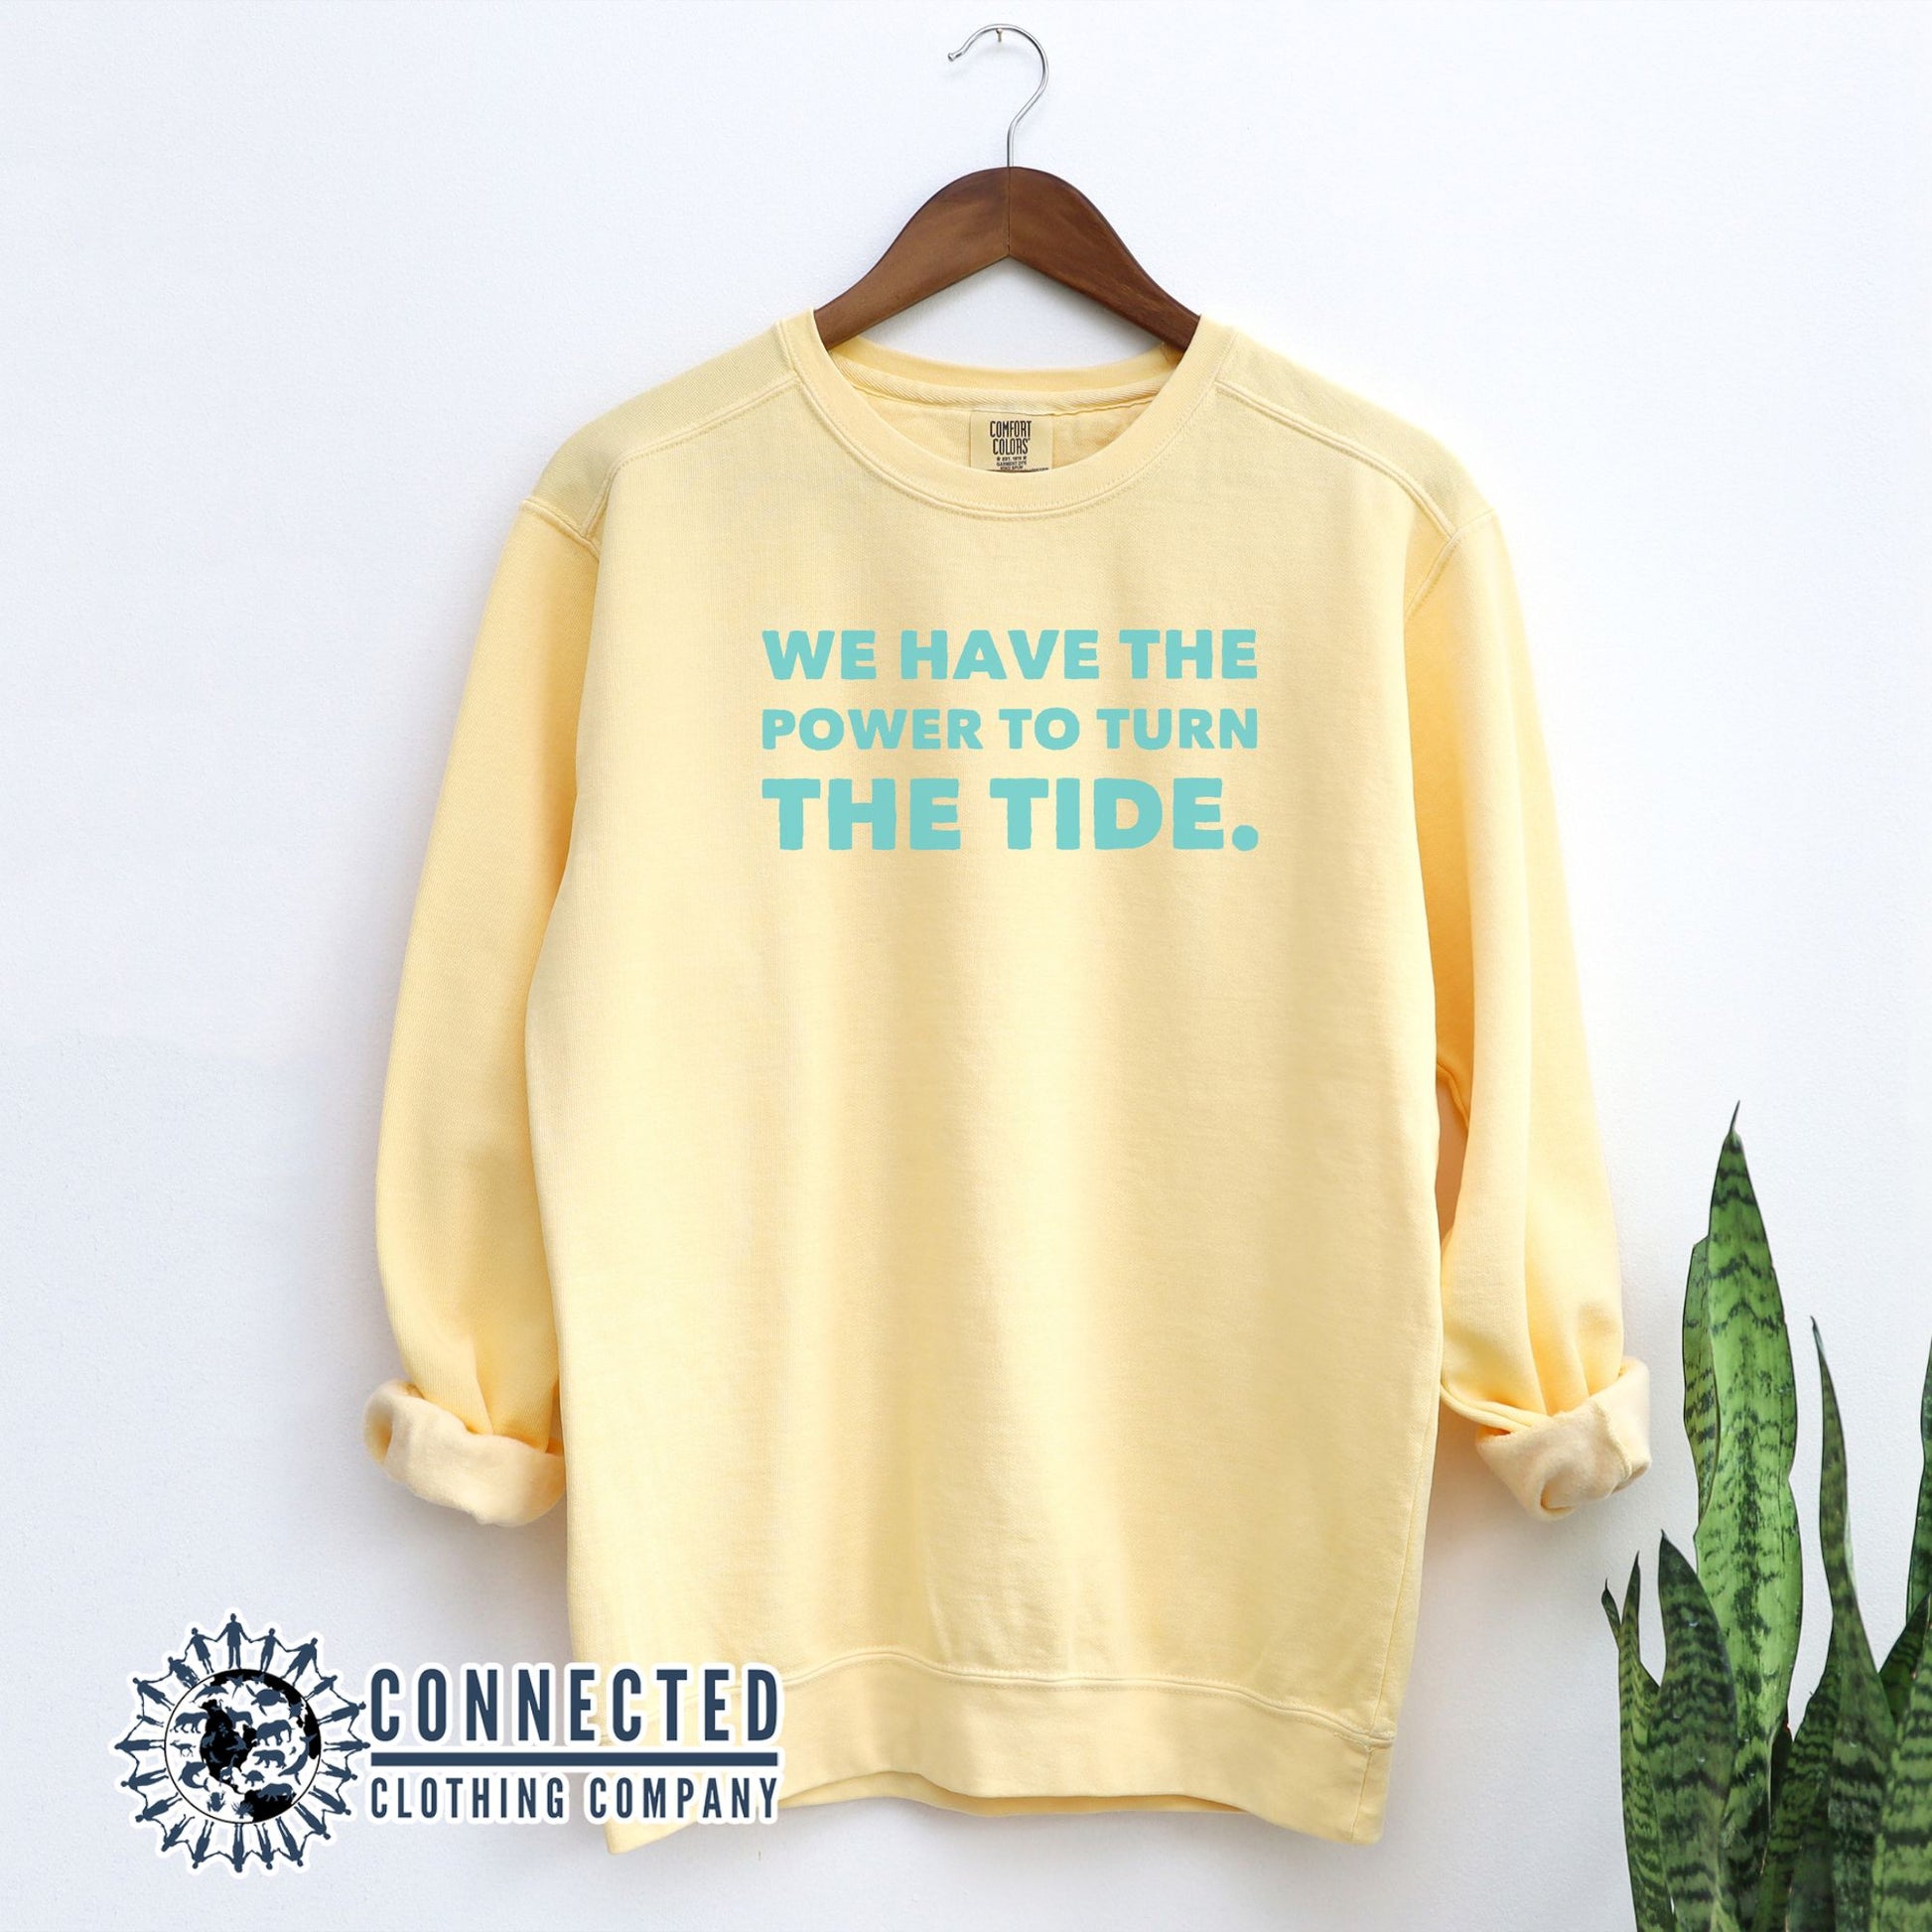 Turn The Tide Crewneck Sweatshirt - Connected Clothing Company - 10% of the proceeds donated to ocean conservation